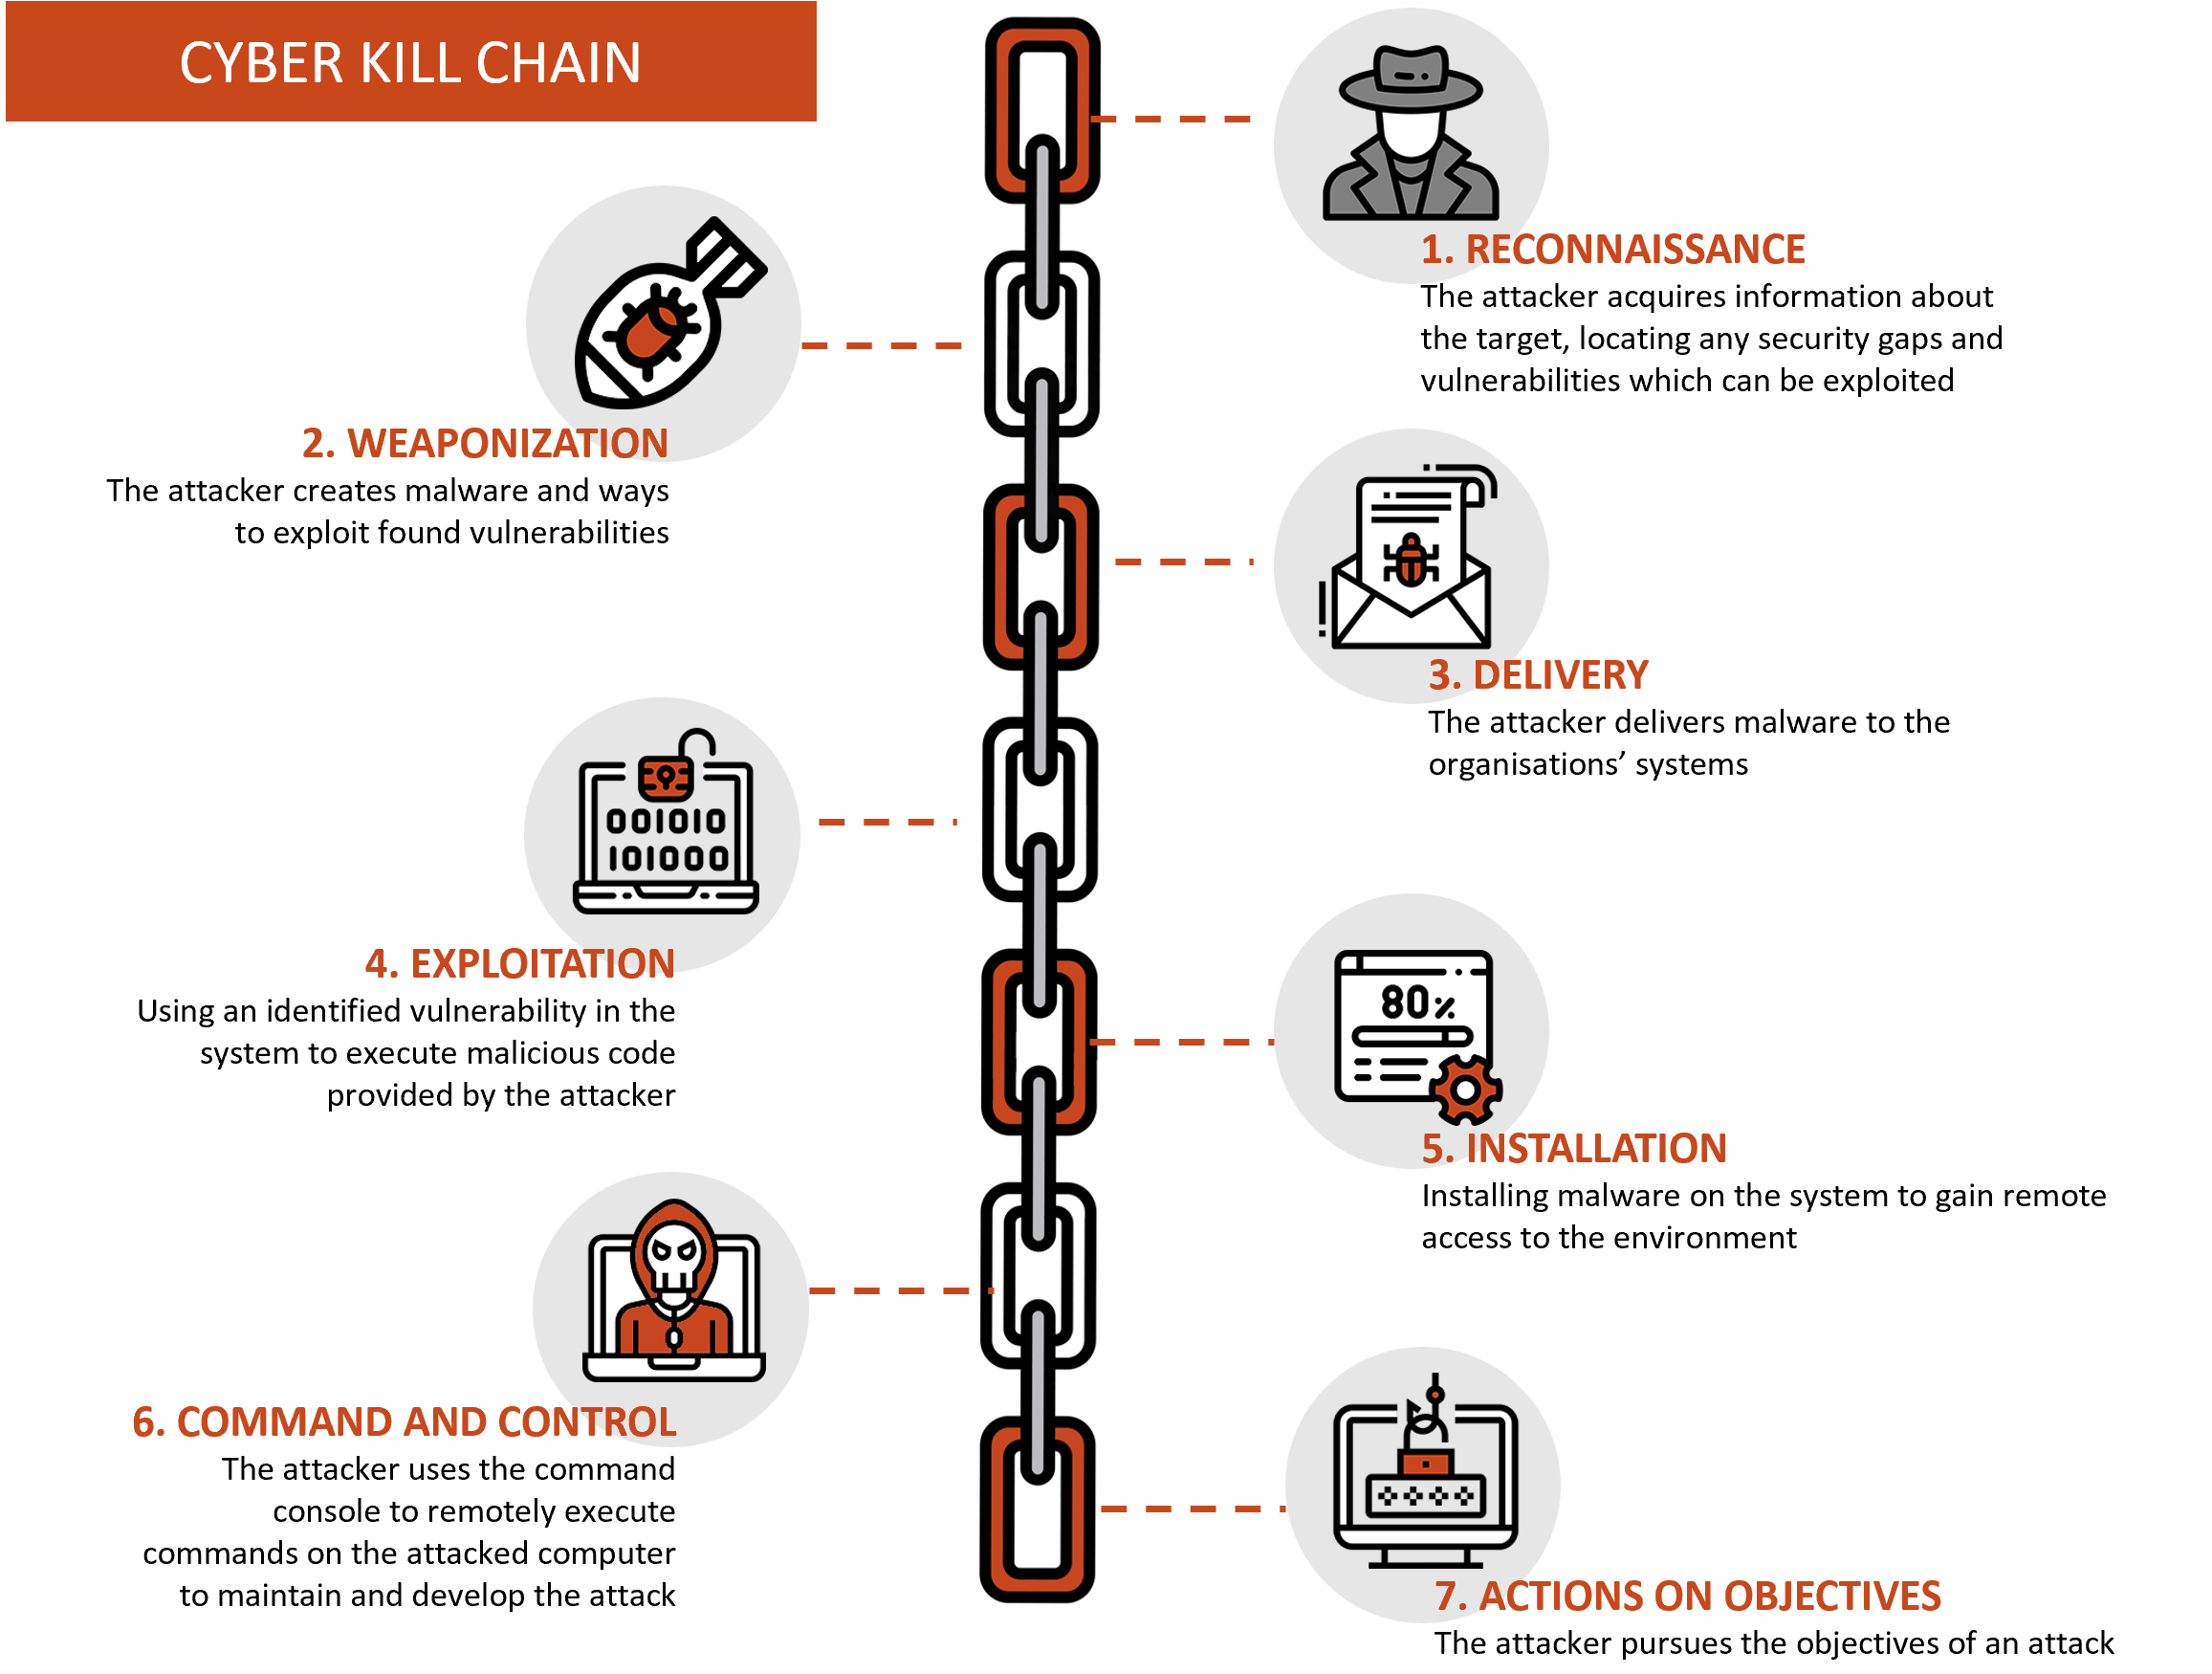 Cyber Kill Chain | Managed IT Services and Cyber Security Services Company  - Teceze